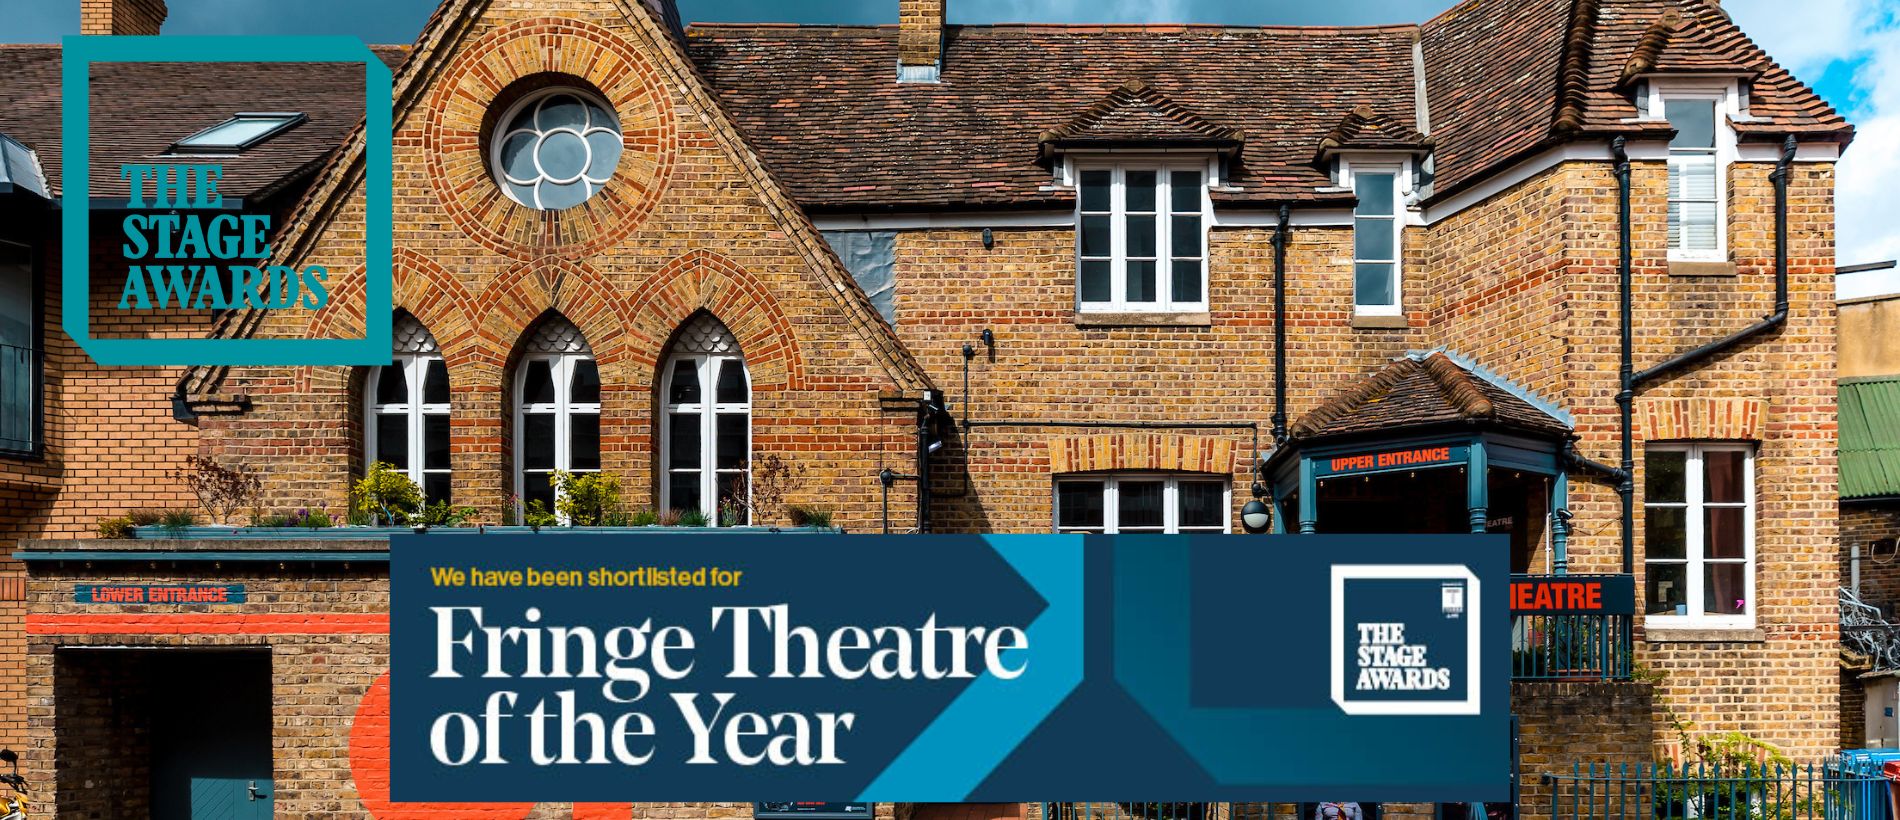 A photo of the Orange Tree Theatre with the Stage Awards teal logo and a The Stage Awards badge reading 'We have been shortlisted for Fringe Theatre of the Year'. The OT building is a brick building, with a large, red, OT symbol painted on the side and a set of stairs leading to the first floor entrance.